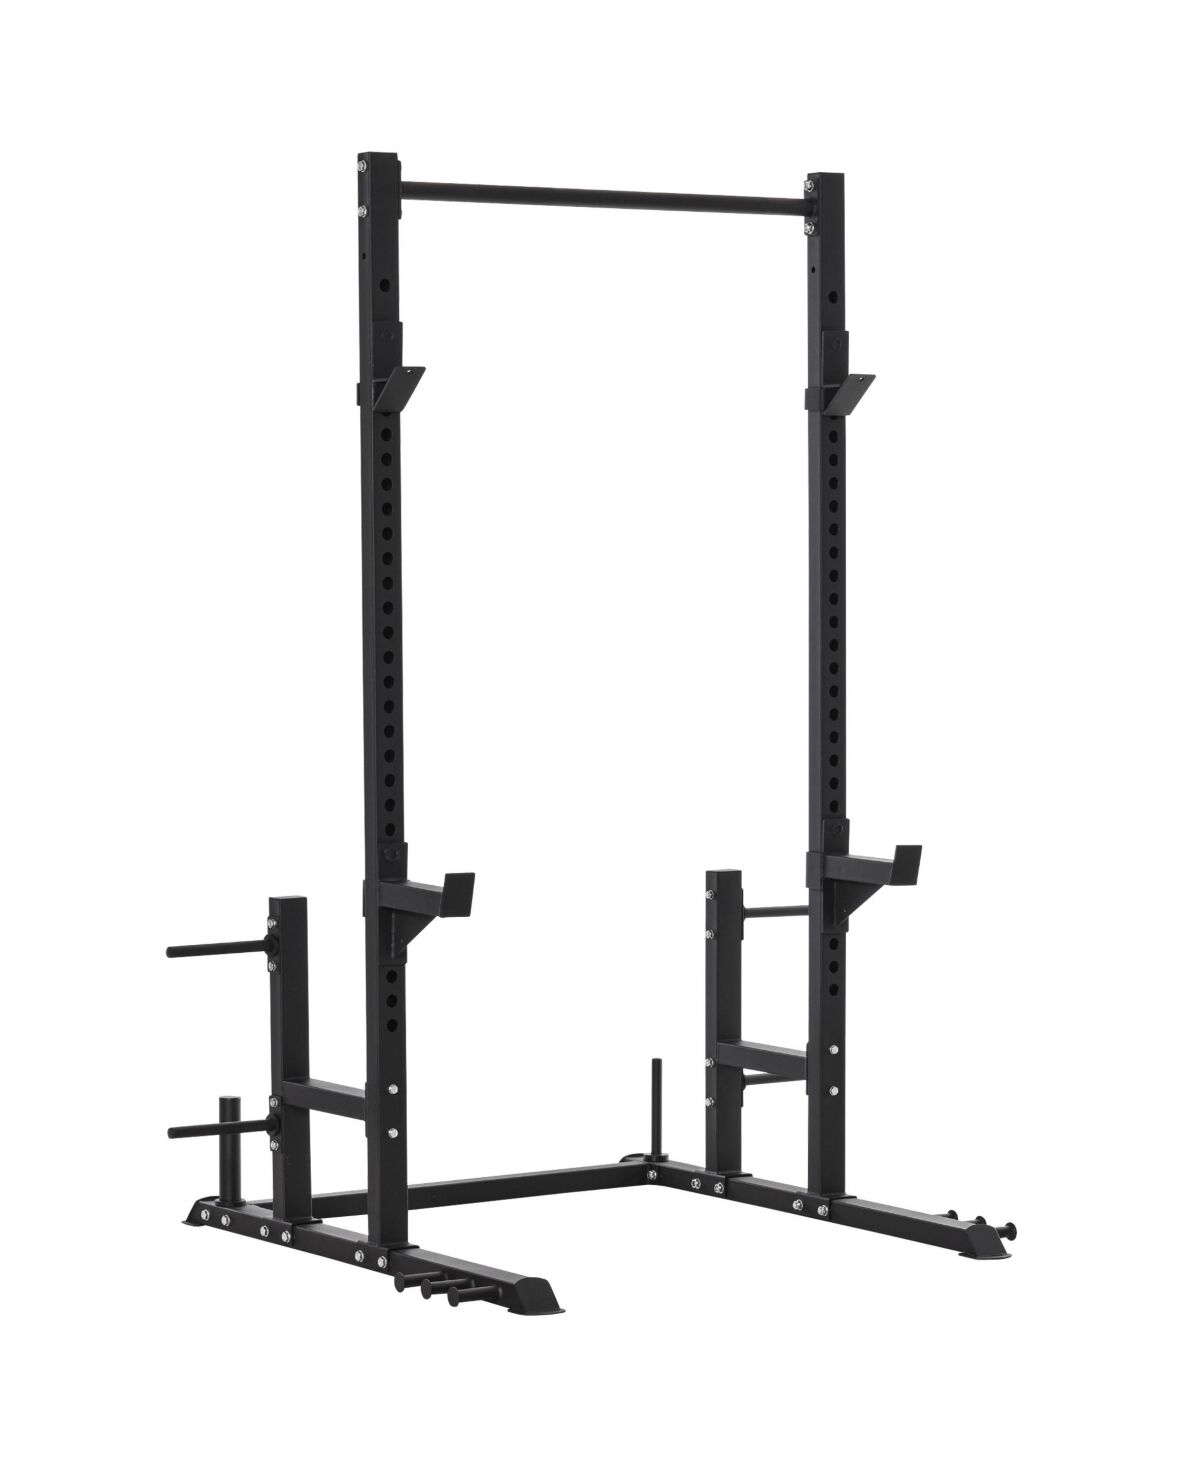 Soozier Dumbbell Storage Equipped Adjustable Power Tower Pull Up Bar Barbell Rack with Heavy-Duty Steel, Power Rack Strength Training Equipment for Ho